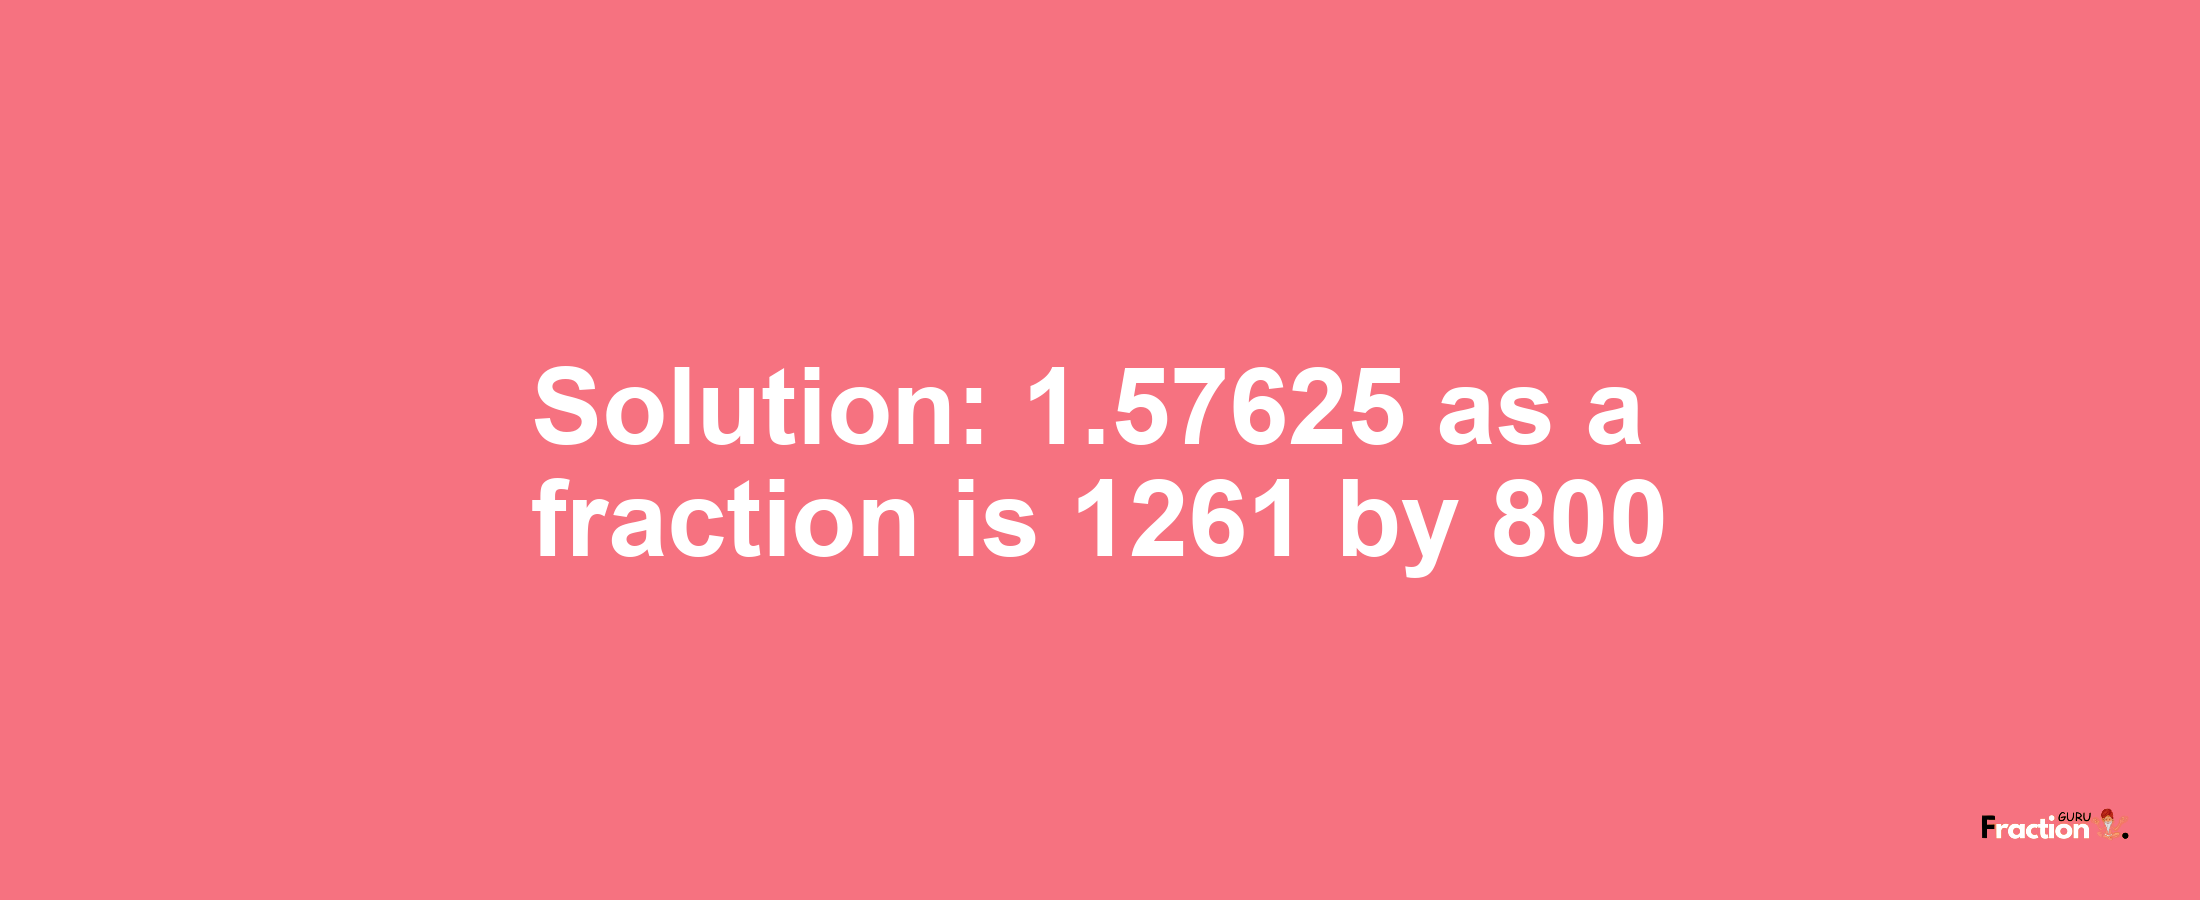 Solution:1.57625 as a fraction is 1261/800